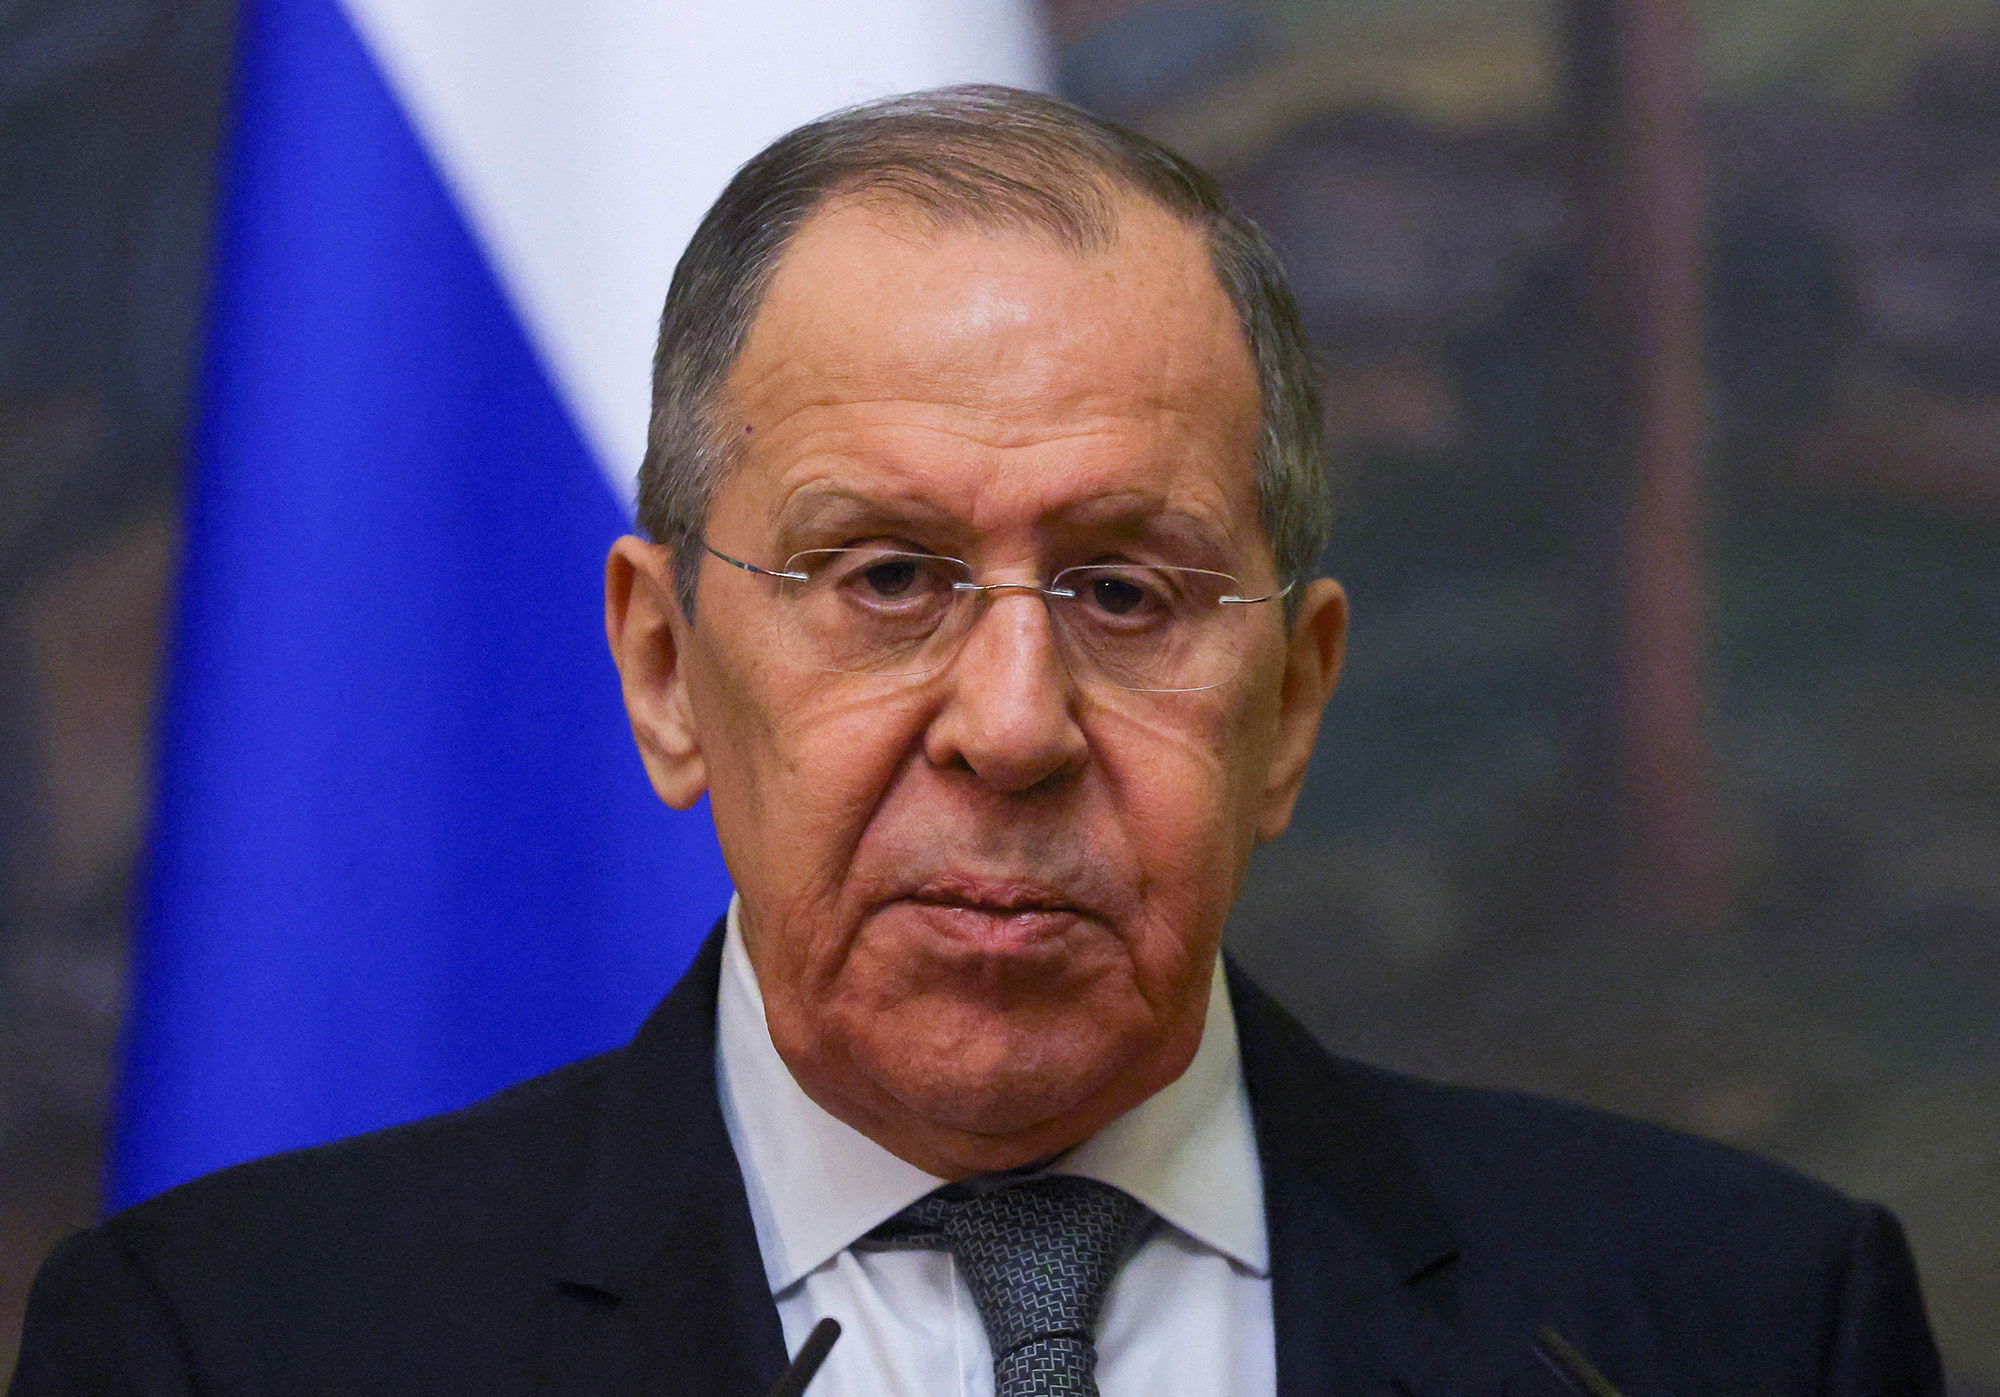 Russia's Foreign Minister Sergei Lavrov speaks during a news conference in Moscow, Russia, on March 17.